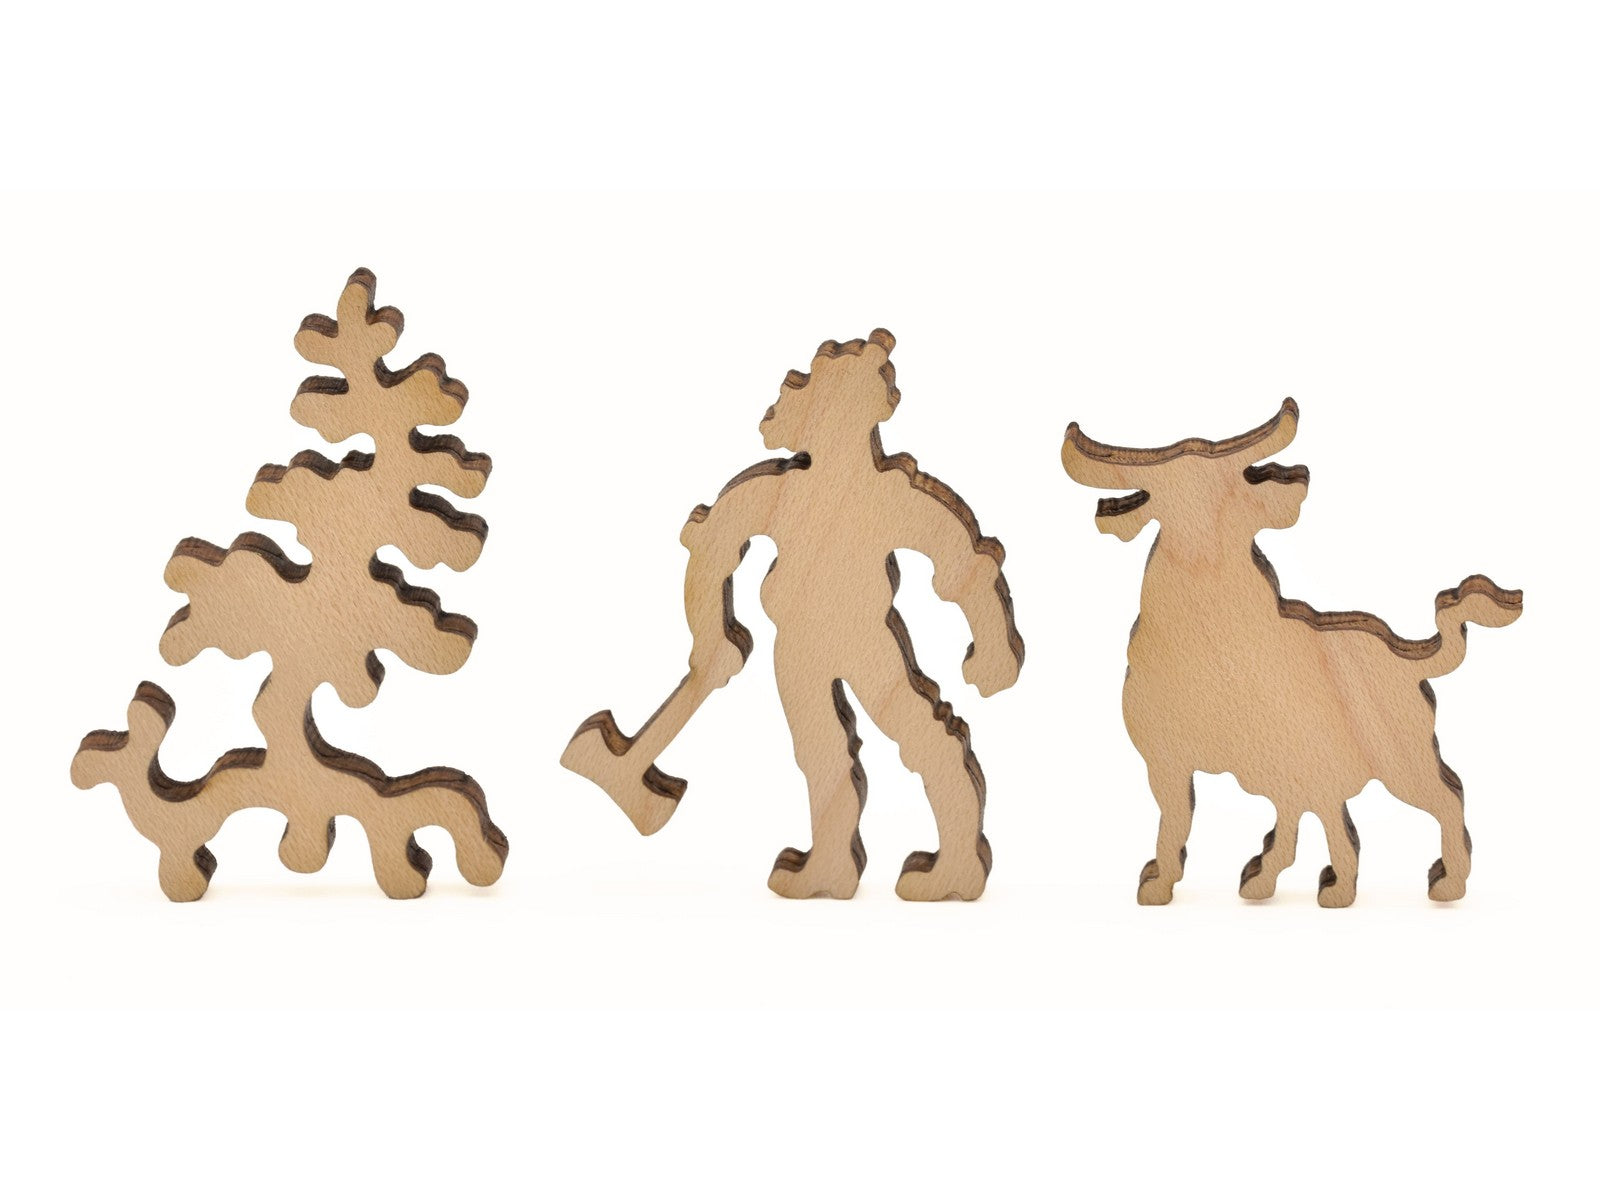 A closeup of pieces in the shape of a tree, a lumberjack, and a bull.